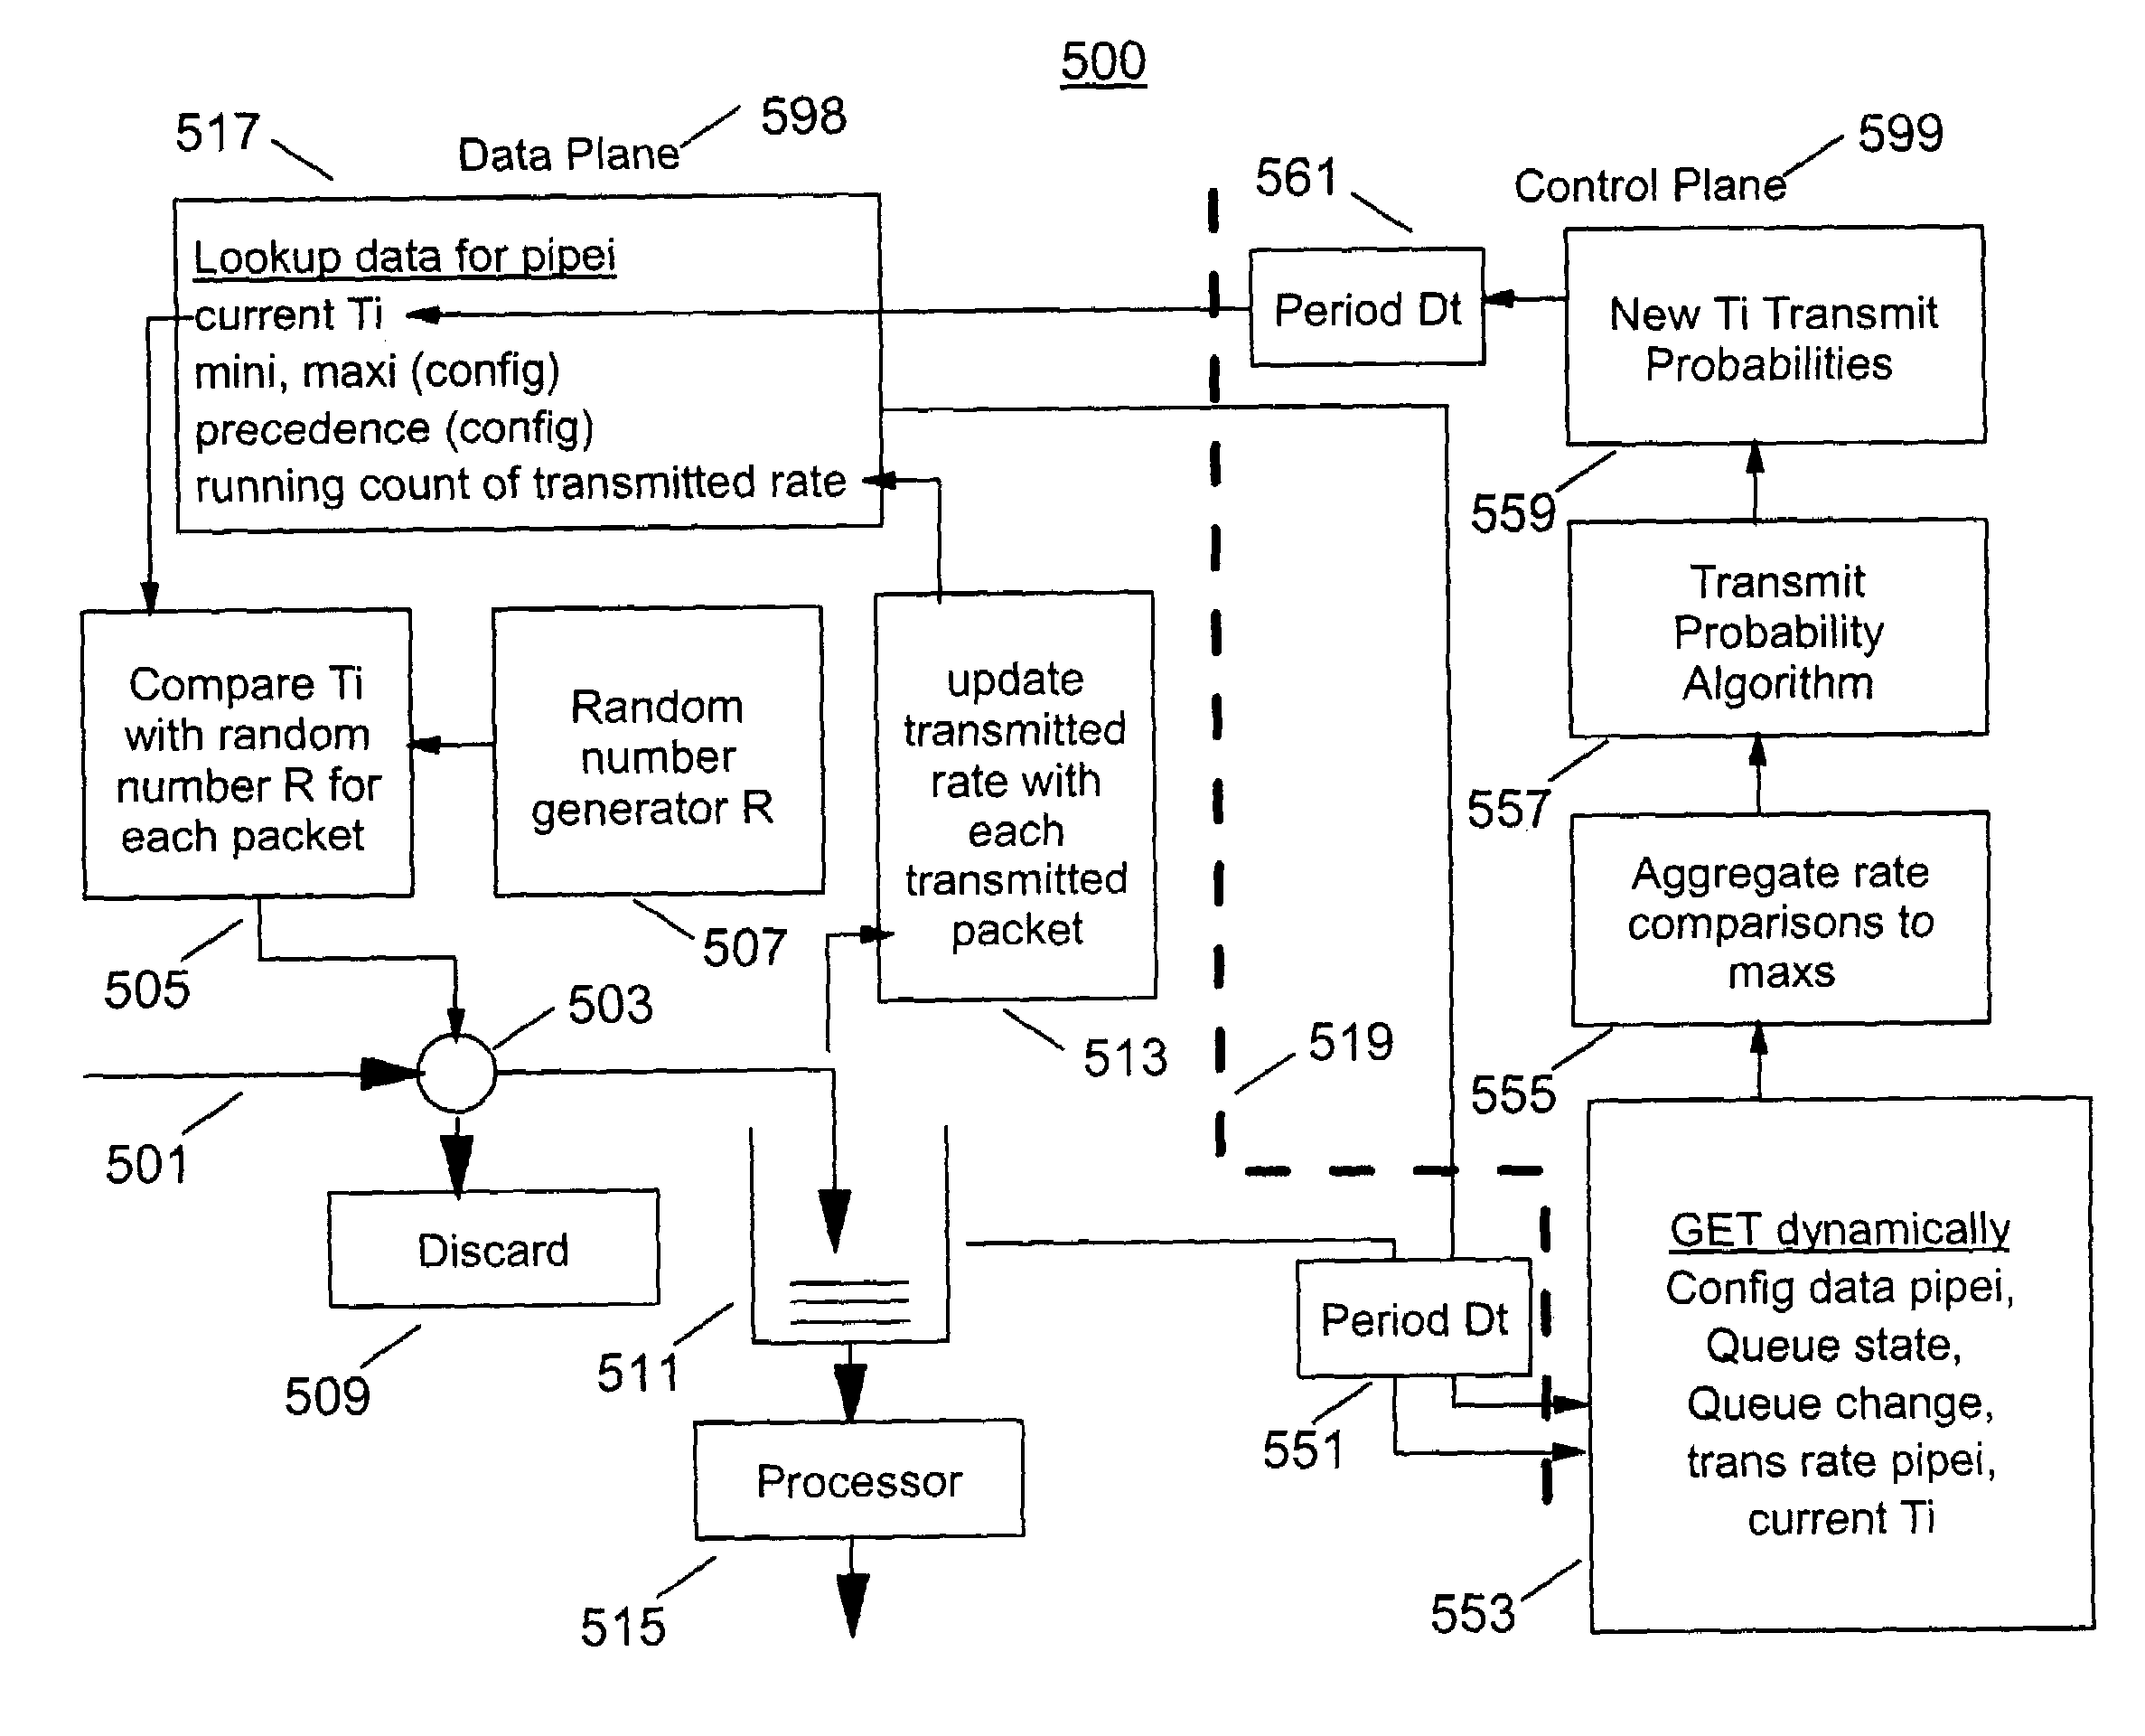 System and method for automatic management of many computer data processing system pipes